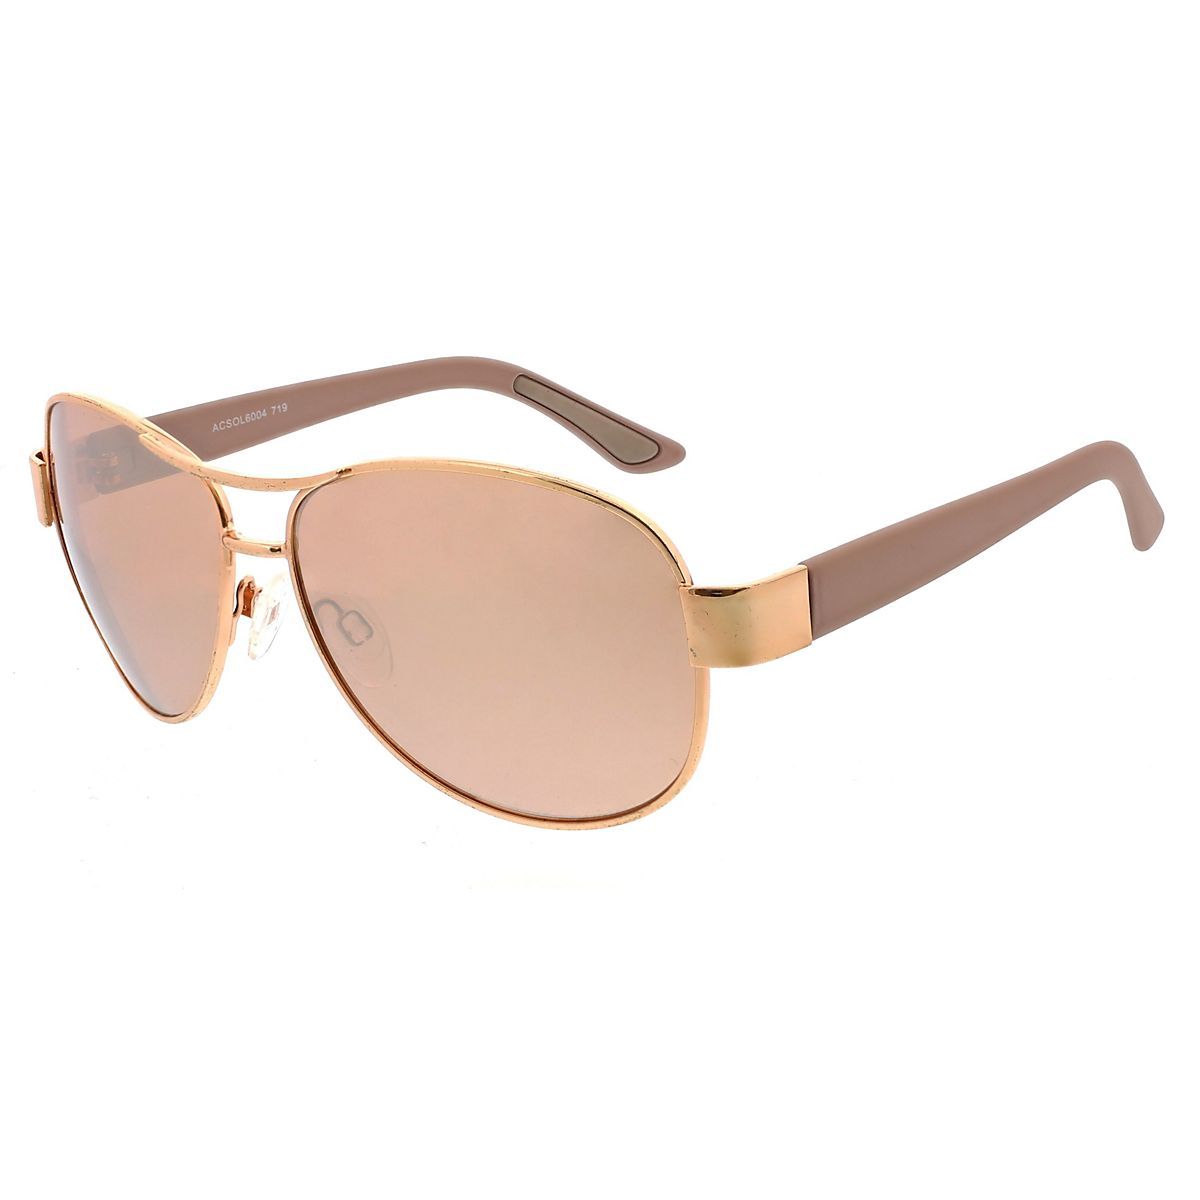 SOL PWR Metal Aviator Sunglasses | Academy Sports + Outdoor Affiliate